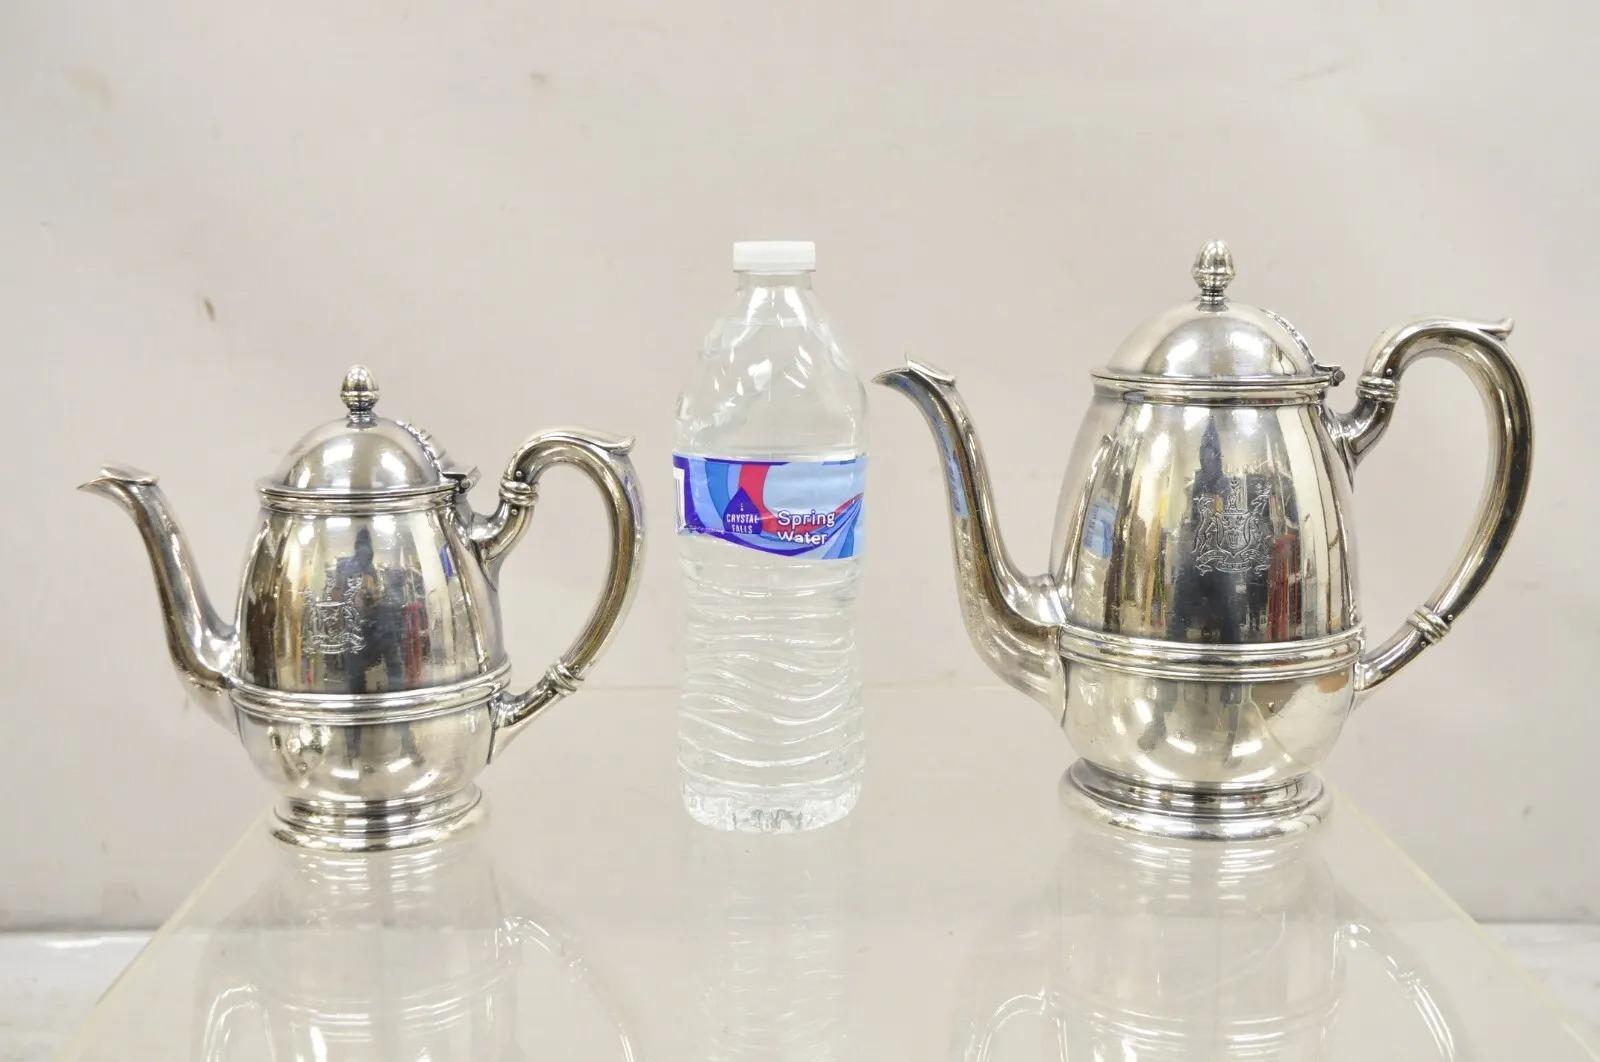 Parker House 1927 Gorham Silver Soldered Silver Plated Coffee Tea Pot 2 Pc Set 6